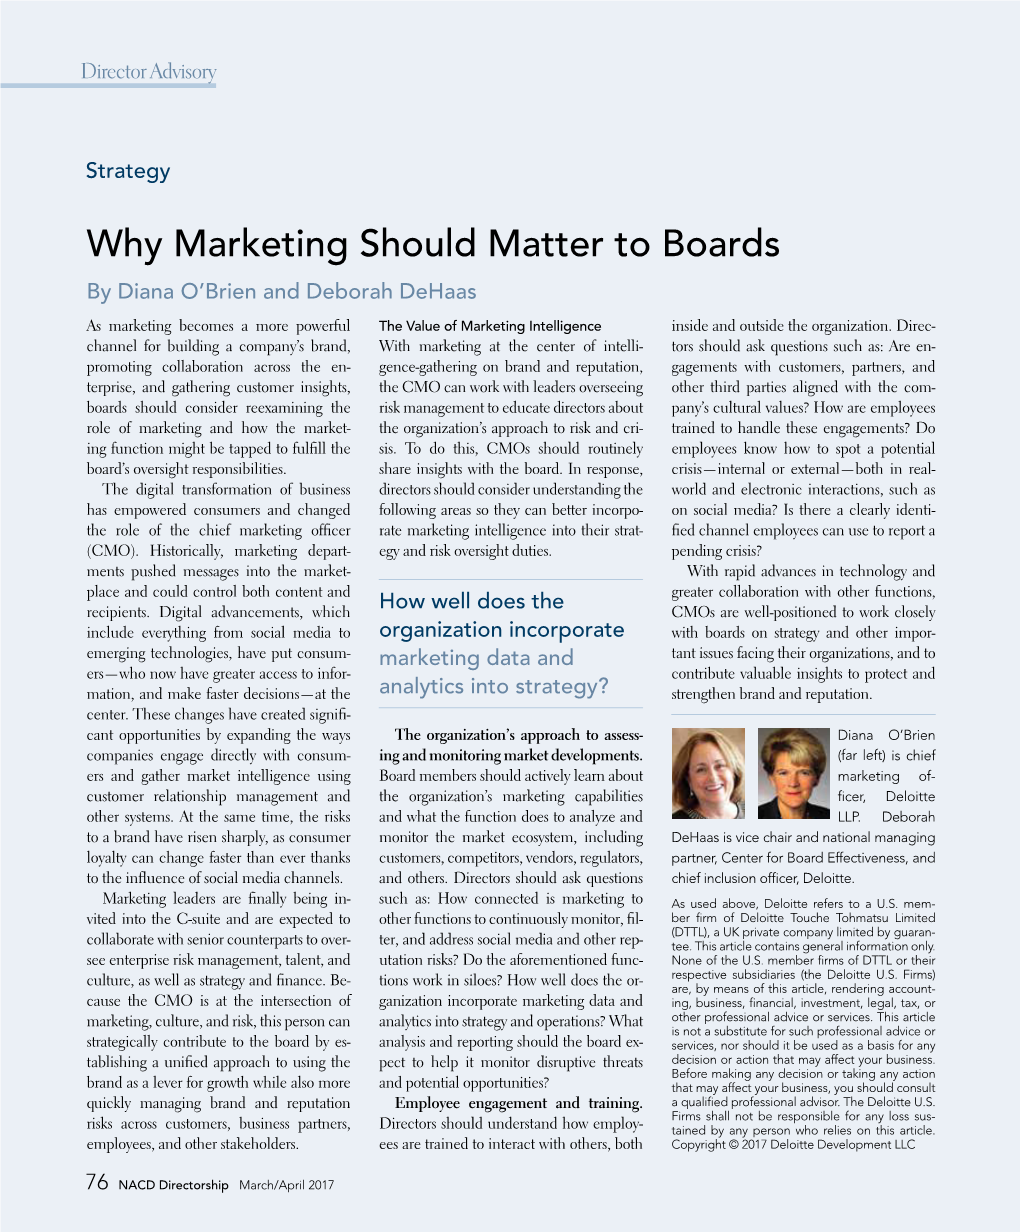 Why Marketing Should Matter to Boards by Diana O’Brien and Deborah Dehaas